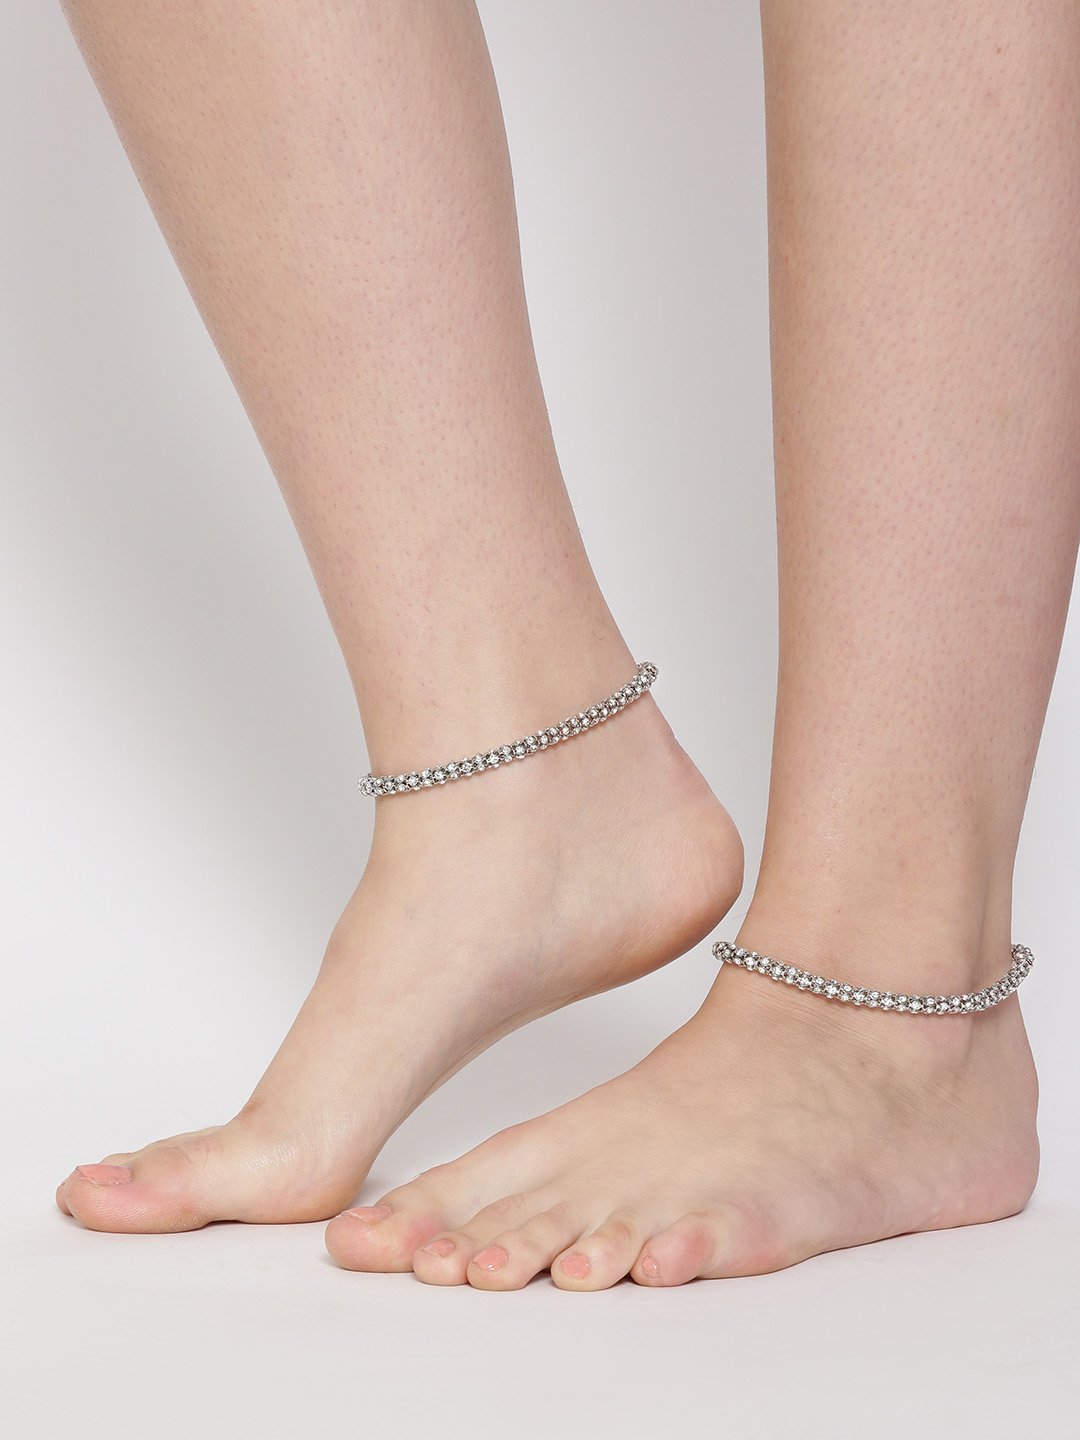 Women's Silver-Toned Stone-Studded Anklets For Women And Girls - Priyaasi